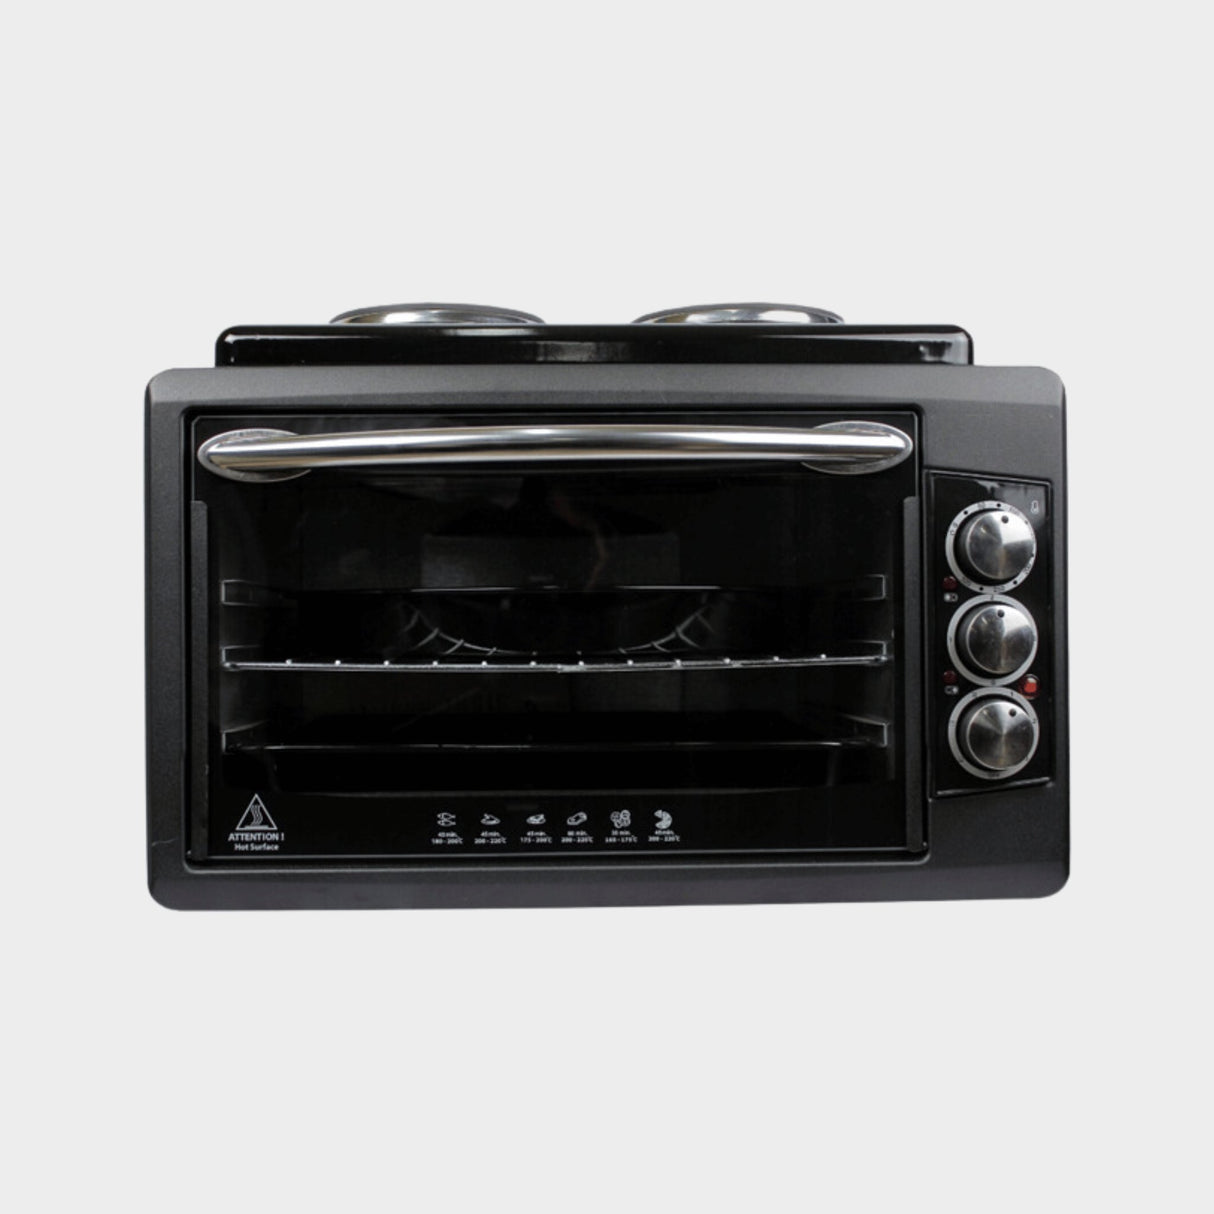 Blueflame 40L Mini Oven with 2 hot plates BF-0125 - Black - KWT Tech Mart